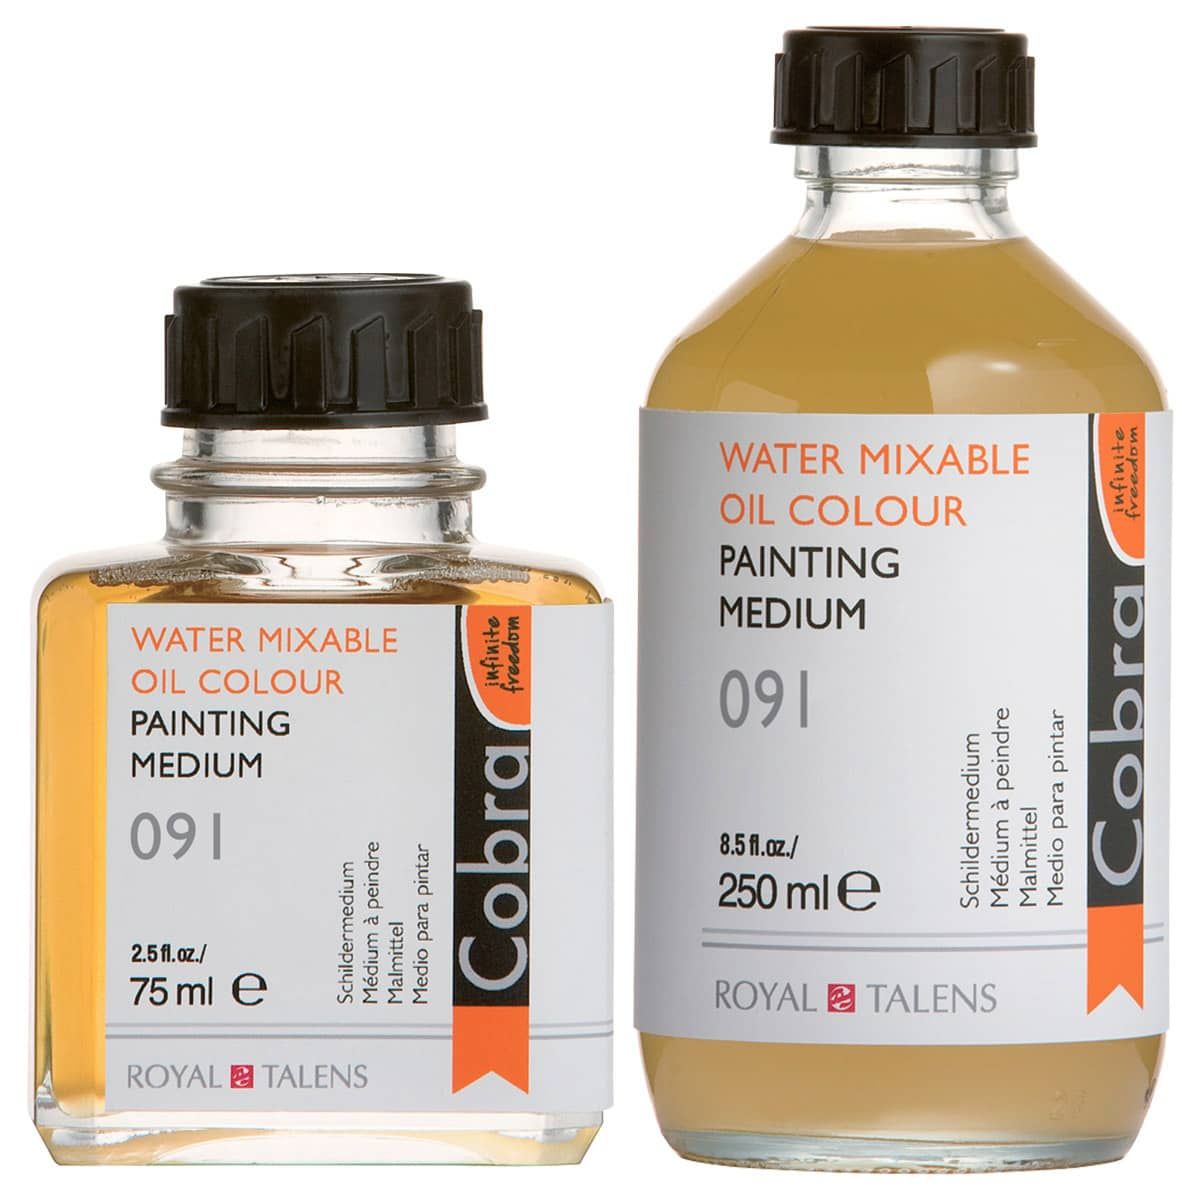 Water Mixable Oil Colour Mediums - Painting Medium